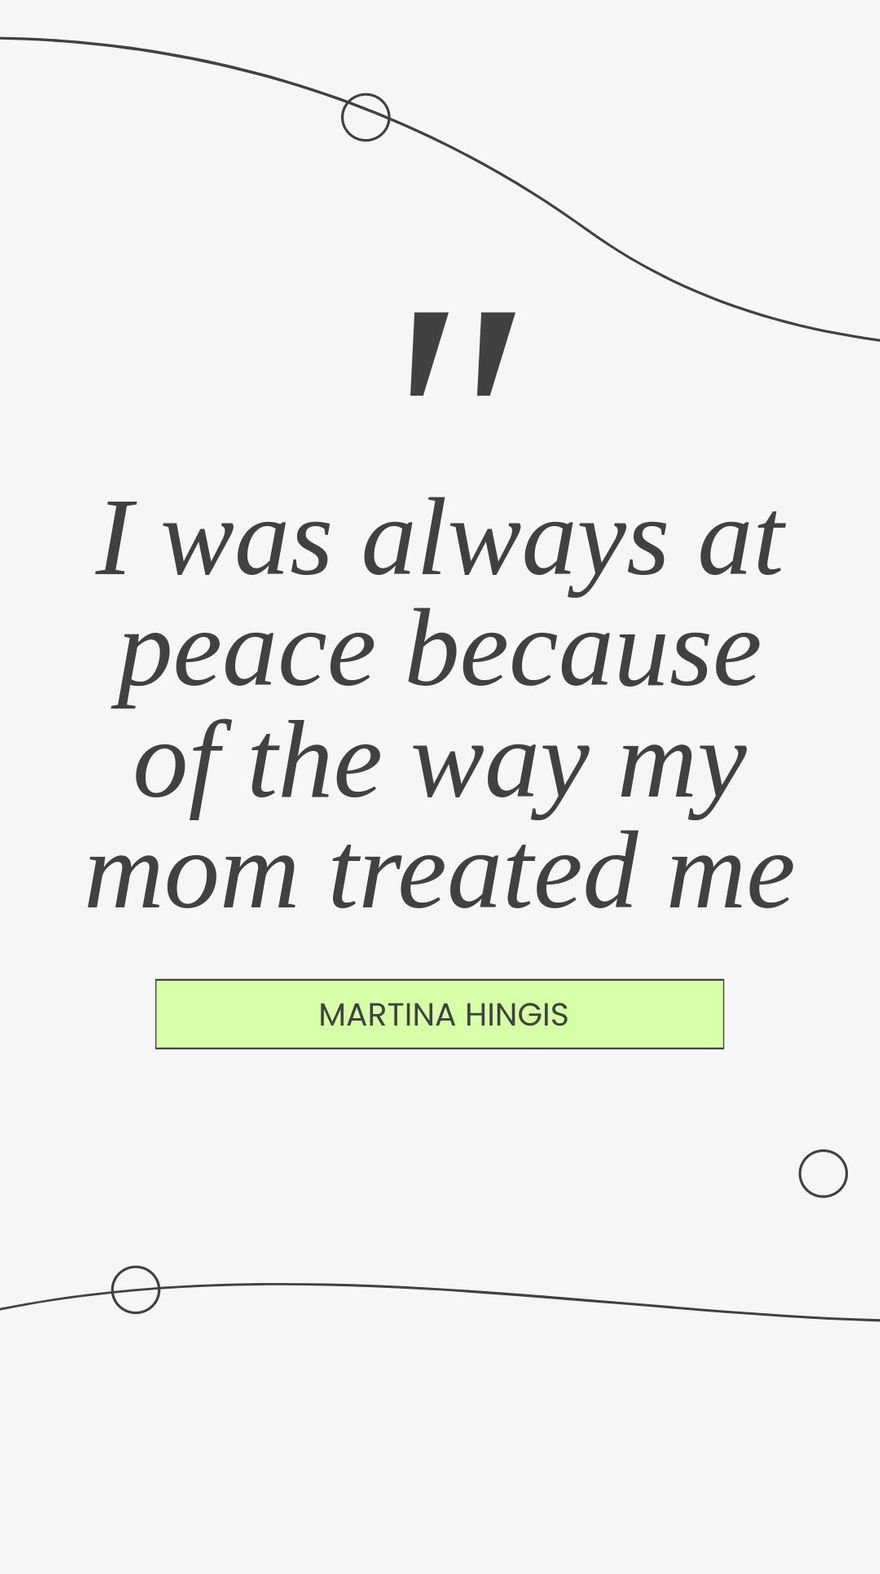 Martina Hingis - I was always at peace because of the way my mom treated me. 